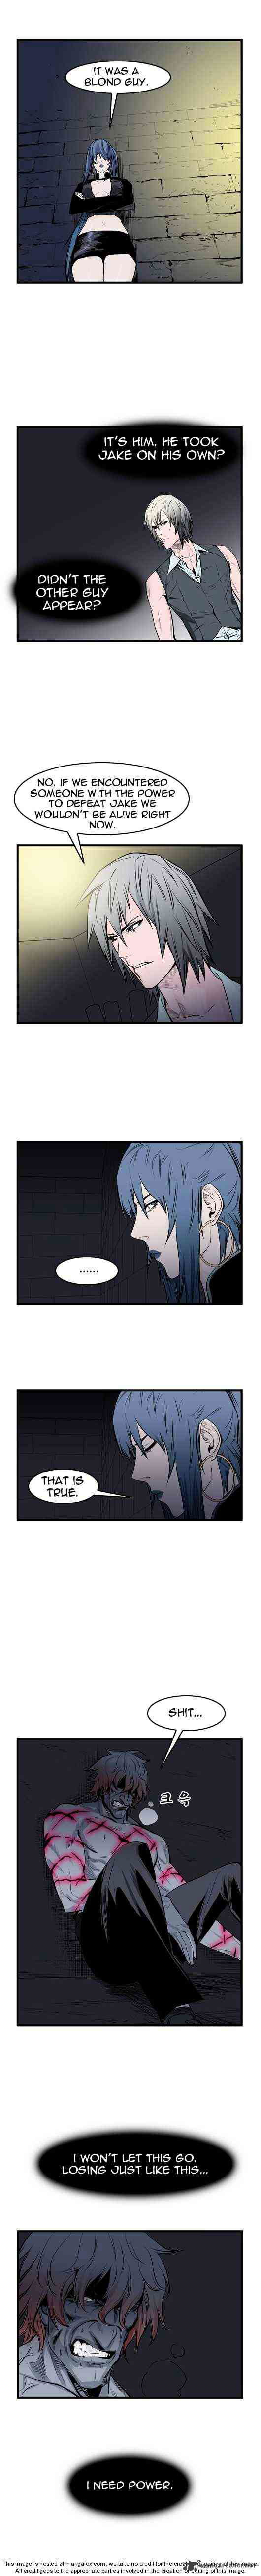 Noblesse Chapter 46 _ Chapters 46-60 page 19